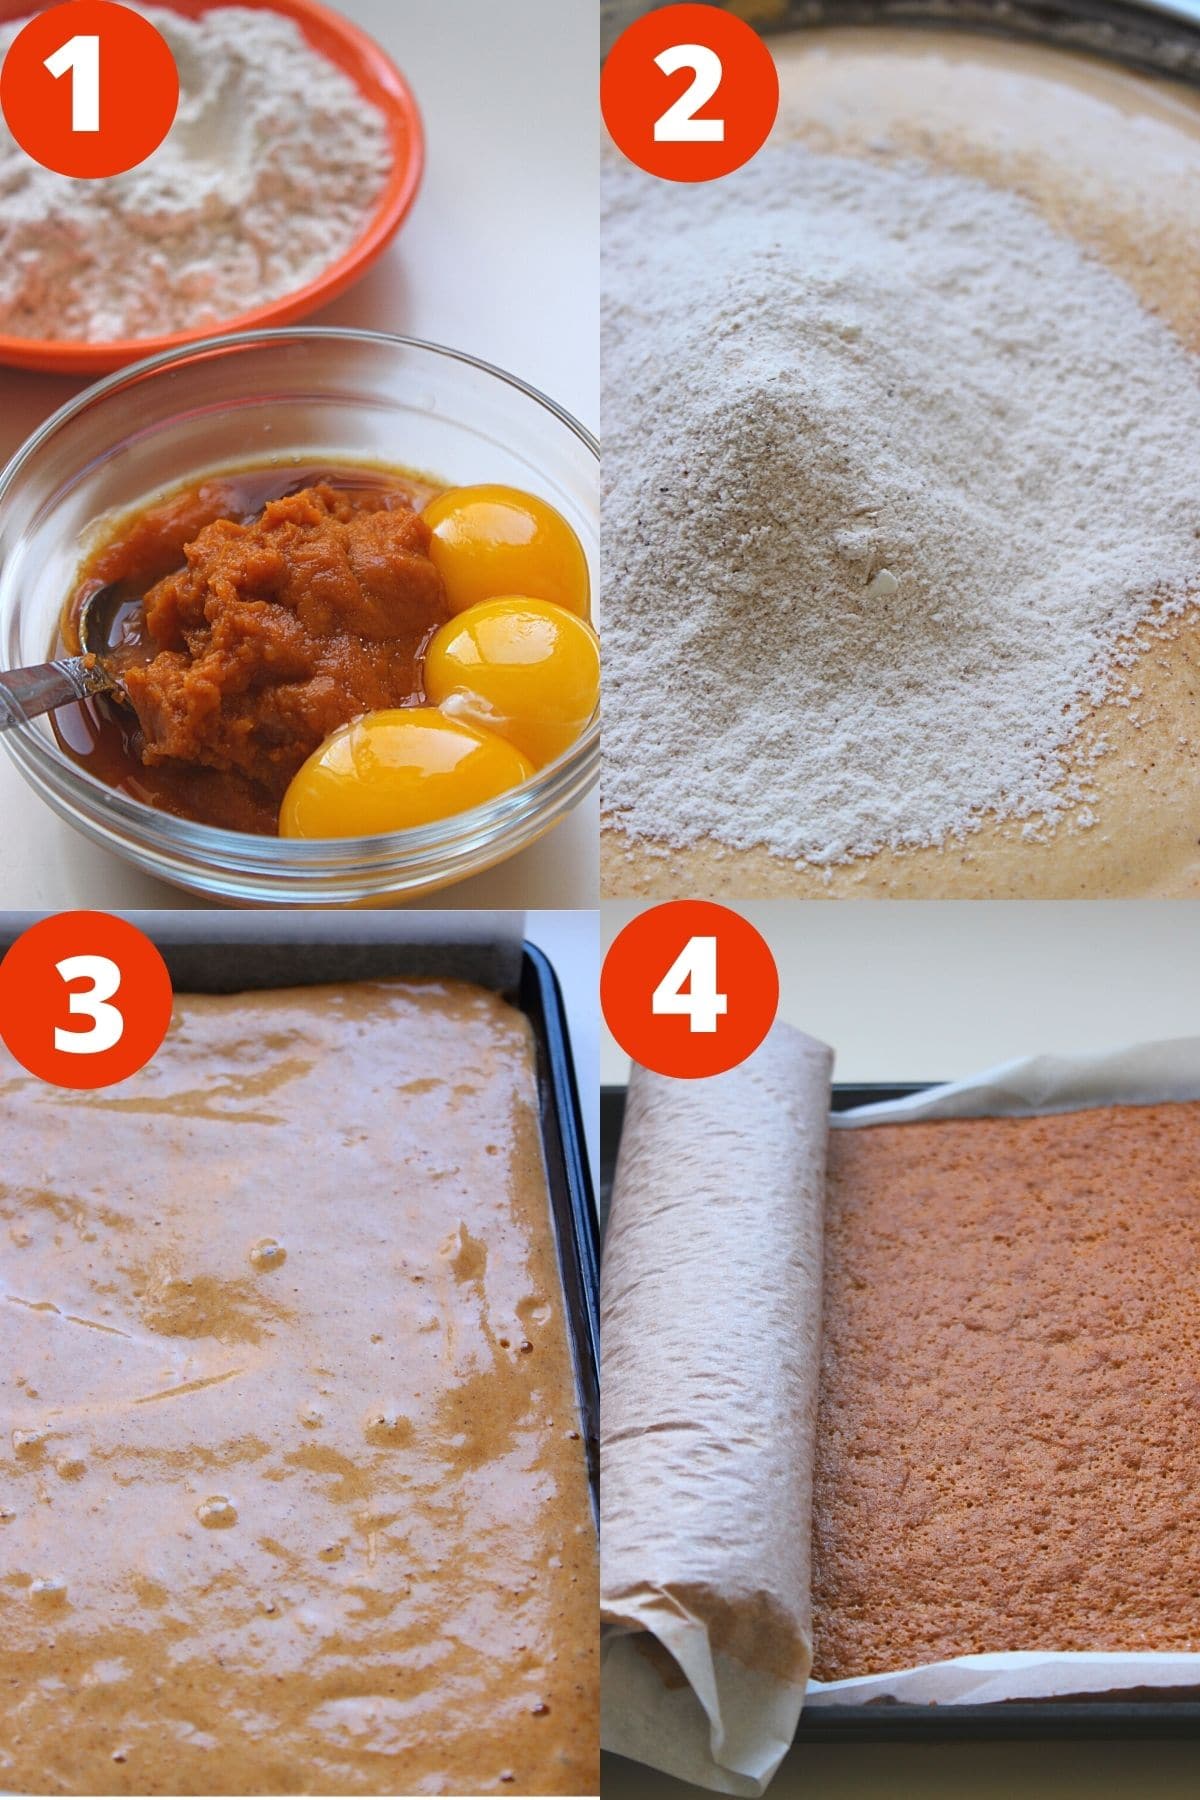 Step by step process to make pumpkin roll by making pumpkin cake batter and baking in jelly roll pan.